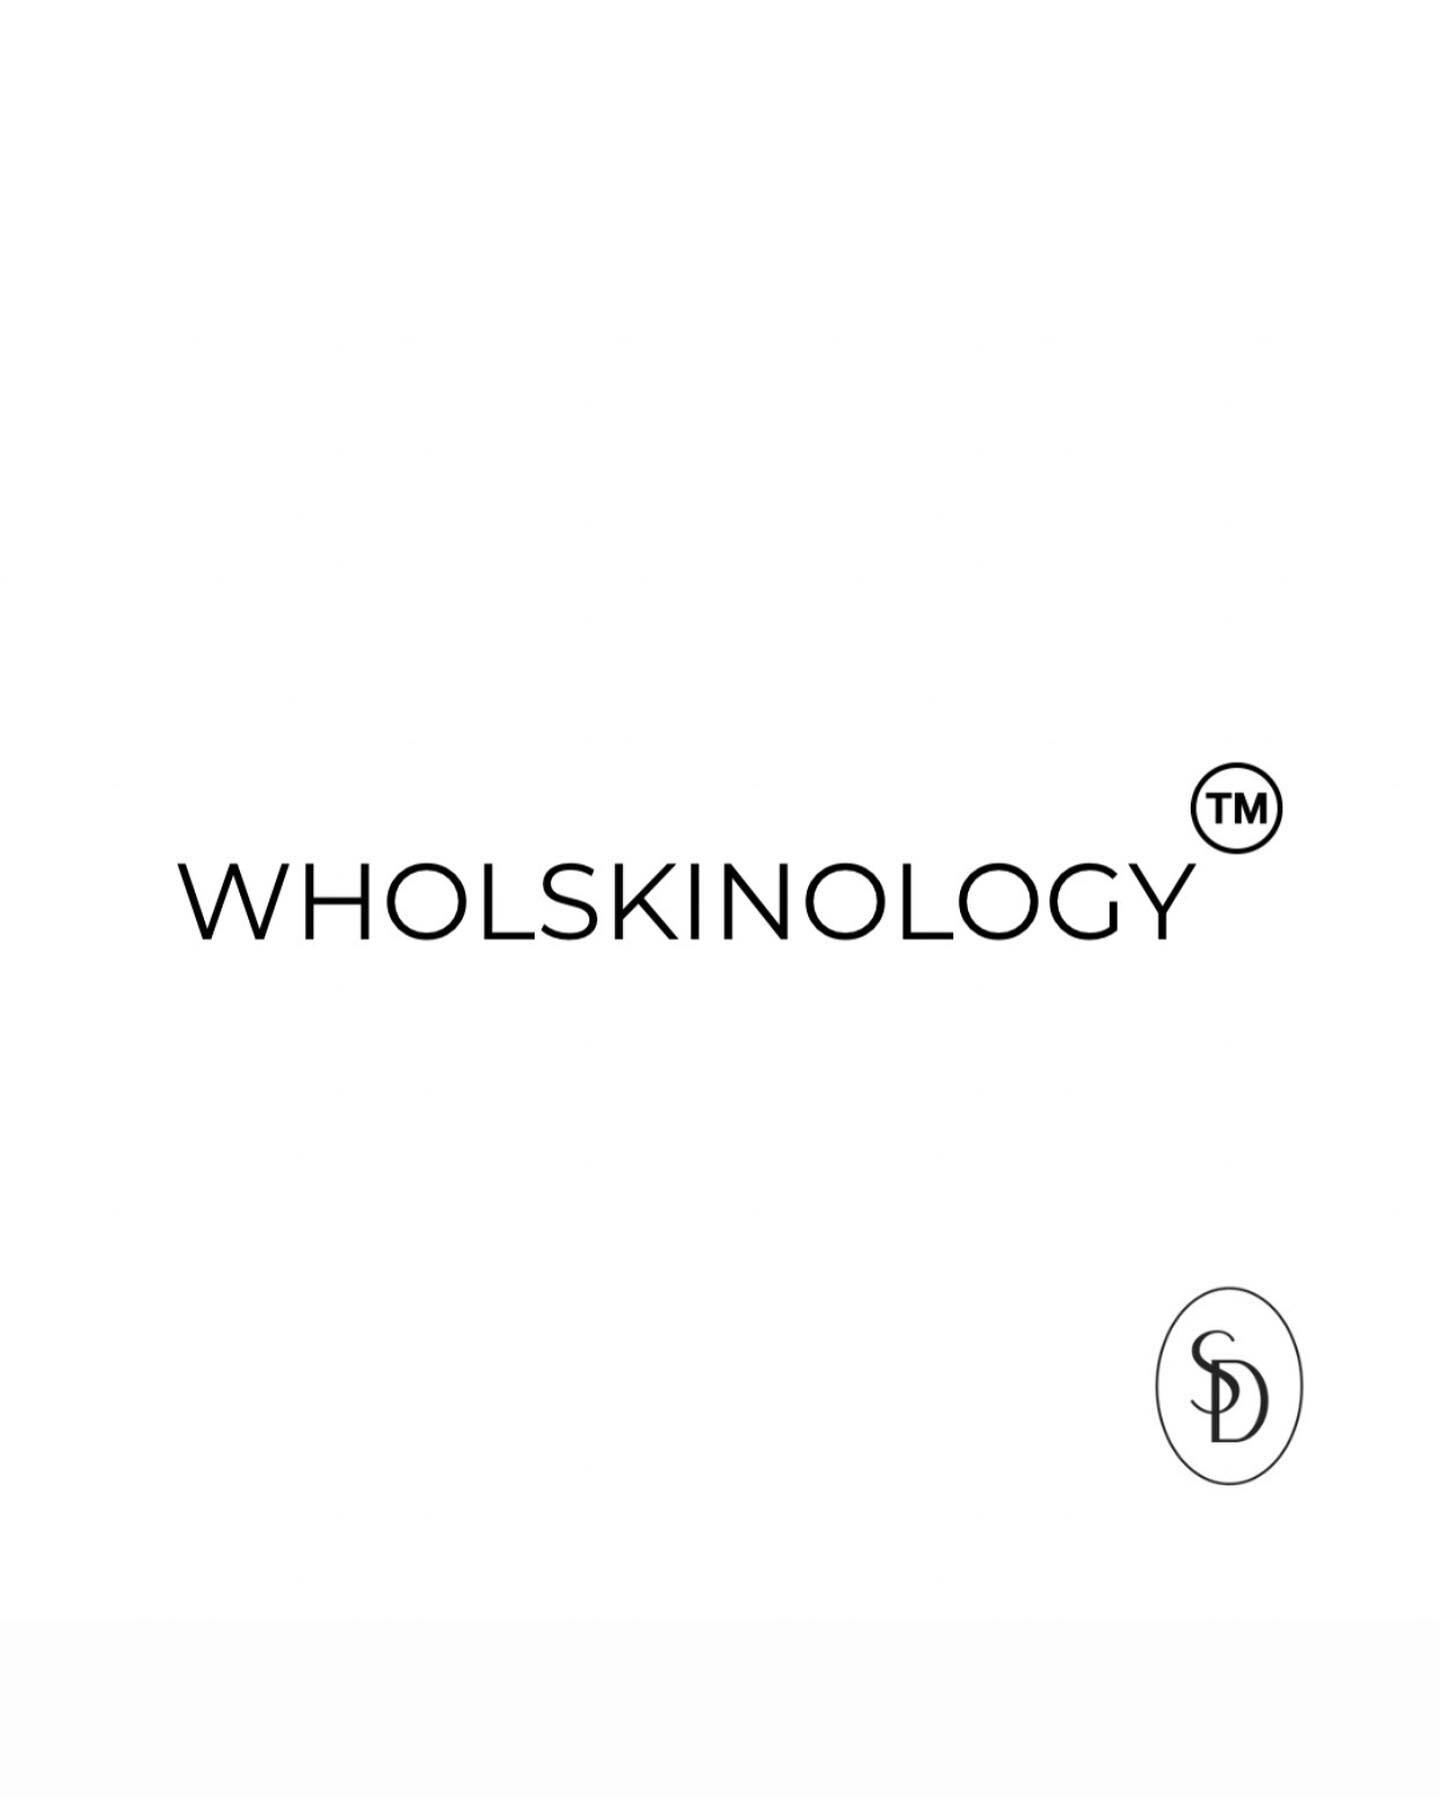 Wholskinology&trade;️ a specialised facial skin therapy designed to treat your skin, mind, body &amp; soul as a whole. 

A combination of natural face lifting techniques that rejuvenate, detoxify and revive the skin, these include Sam Davies signatur